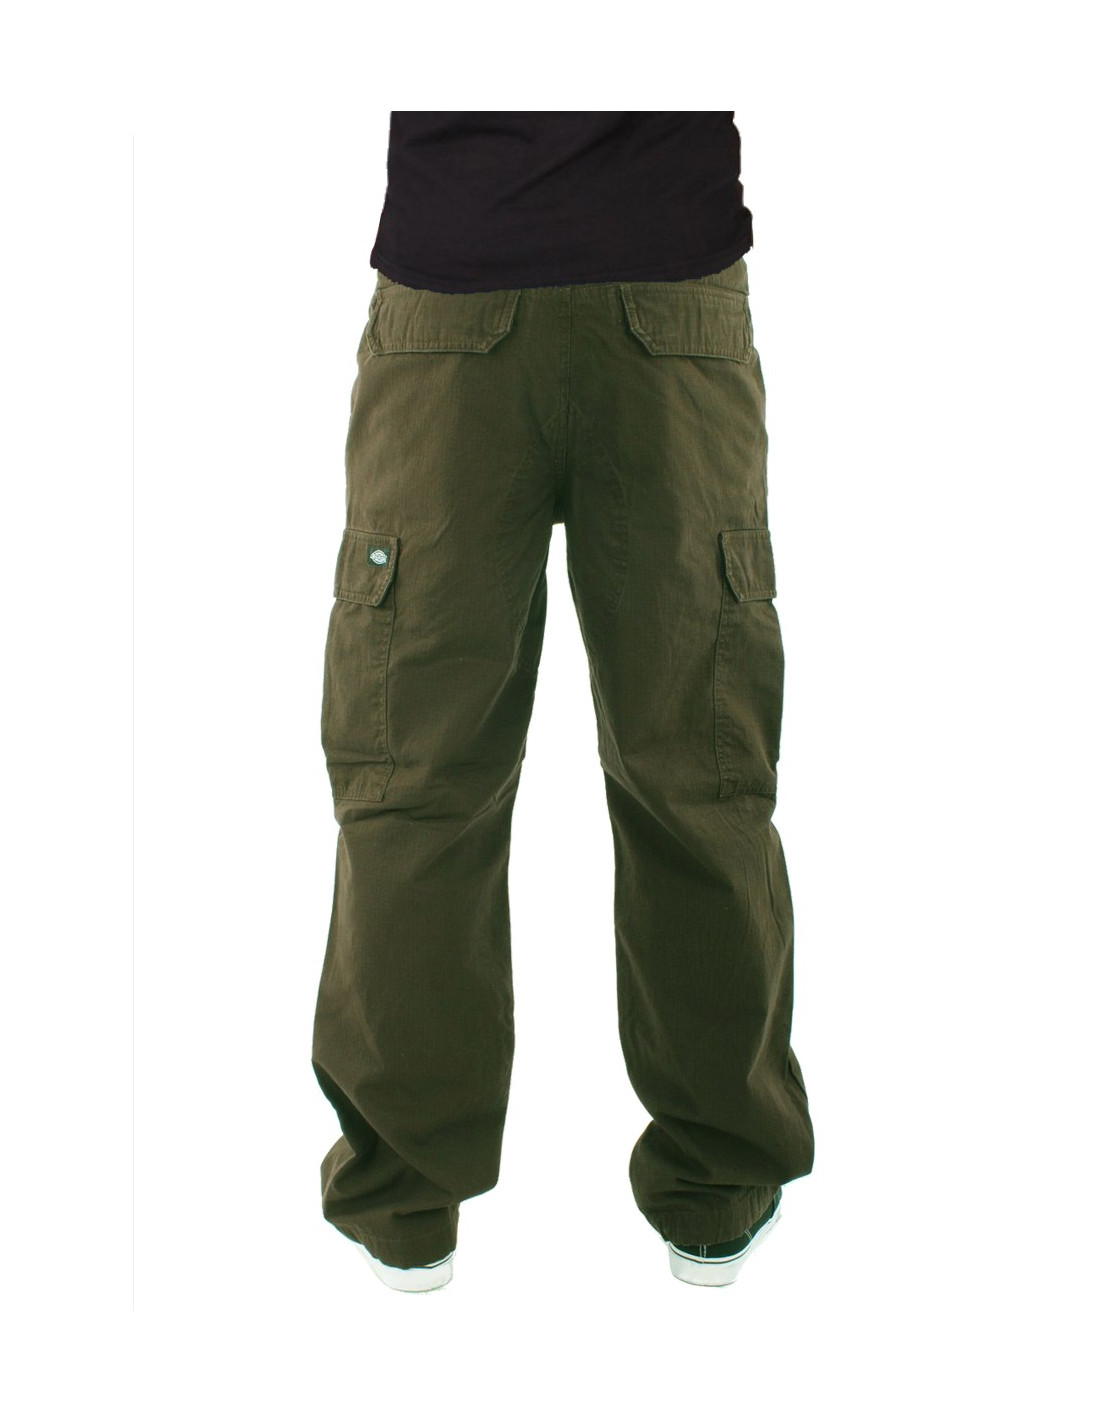 Dickies New York Cargo Pants Olive Green